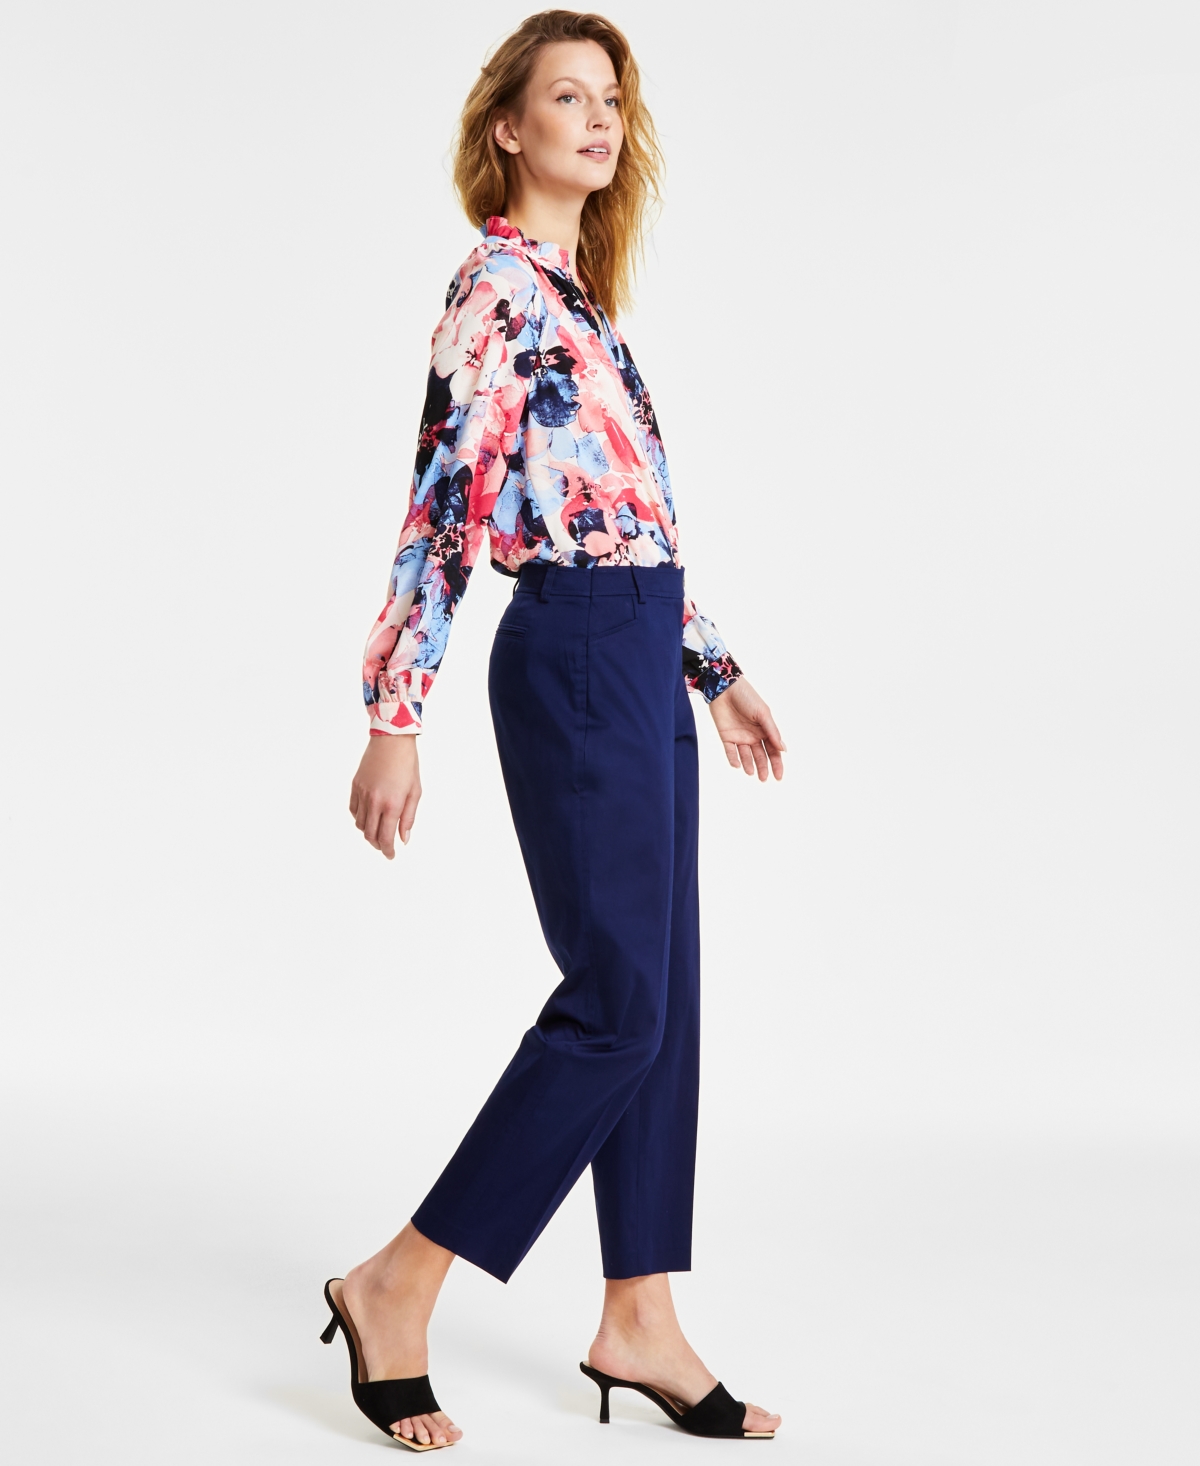 Shop Jones New York Women's Mid Rise Ankle Pants In Pacific Navy